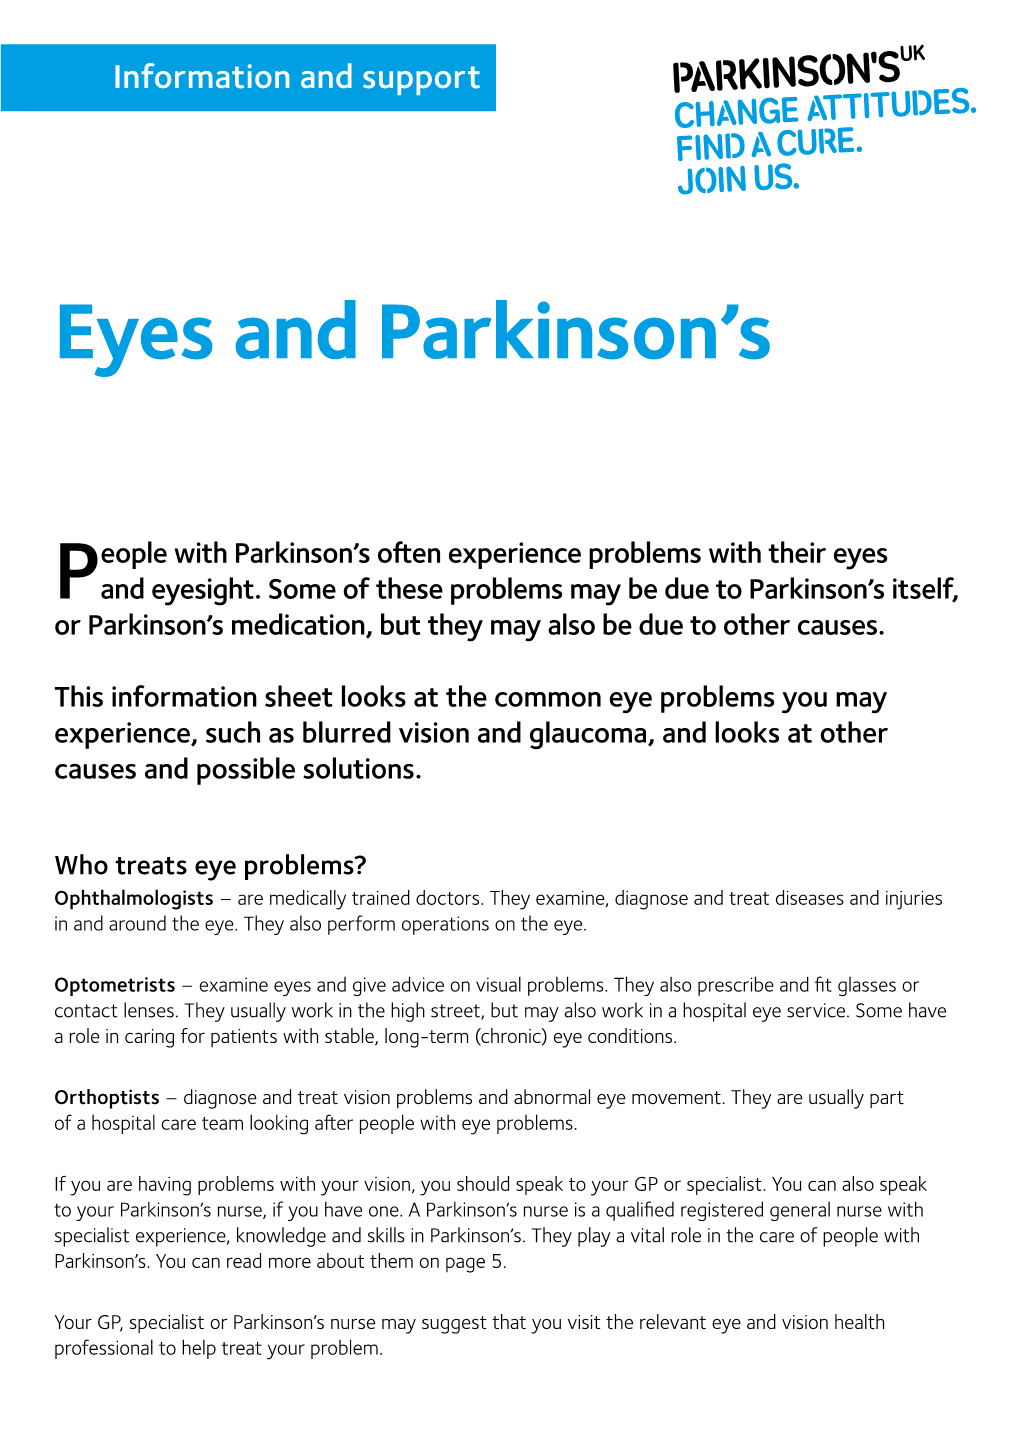 People with Parkinson's Often Experience Problems with Their Eyes